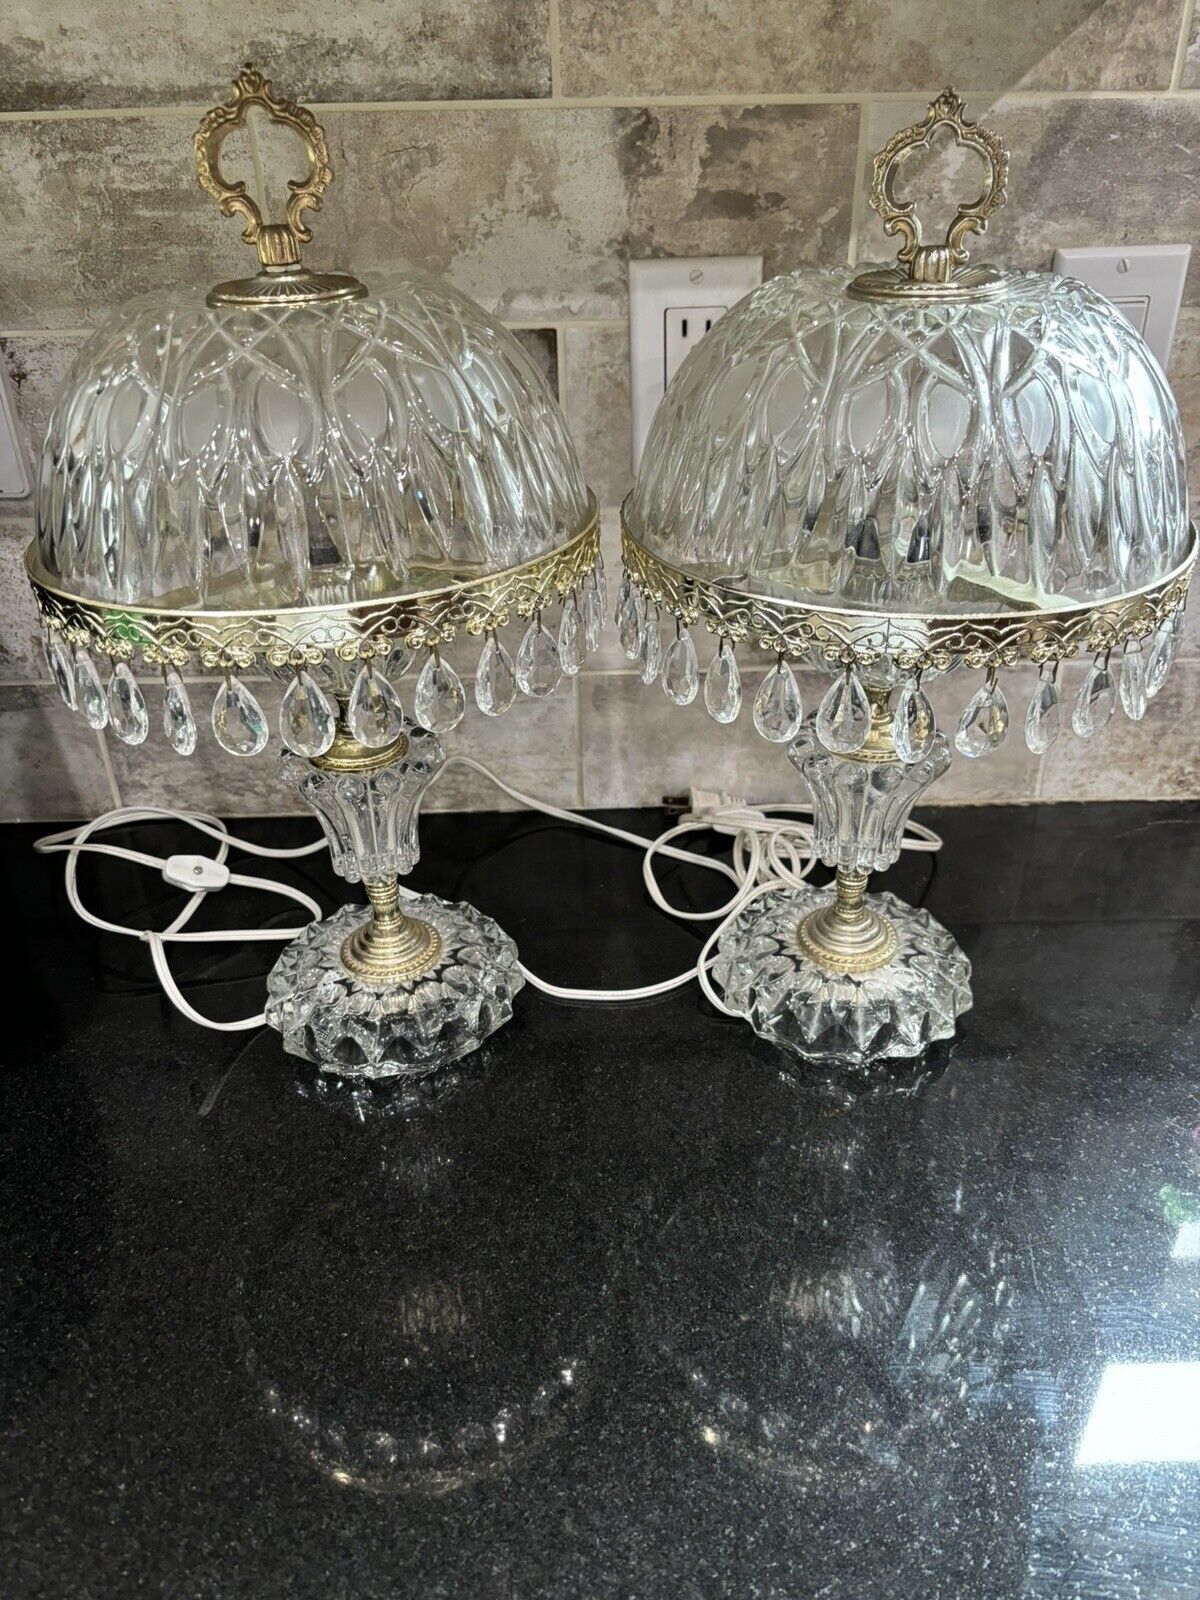 Vintage 16” Michelotti Crystal Lamps W/Prisms Excellent Condition Just Beautiful